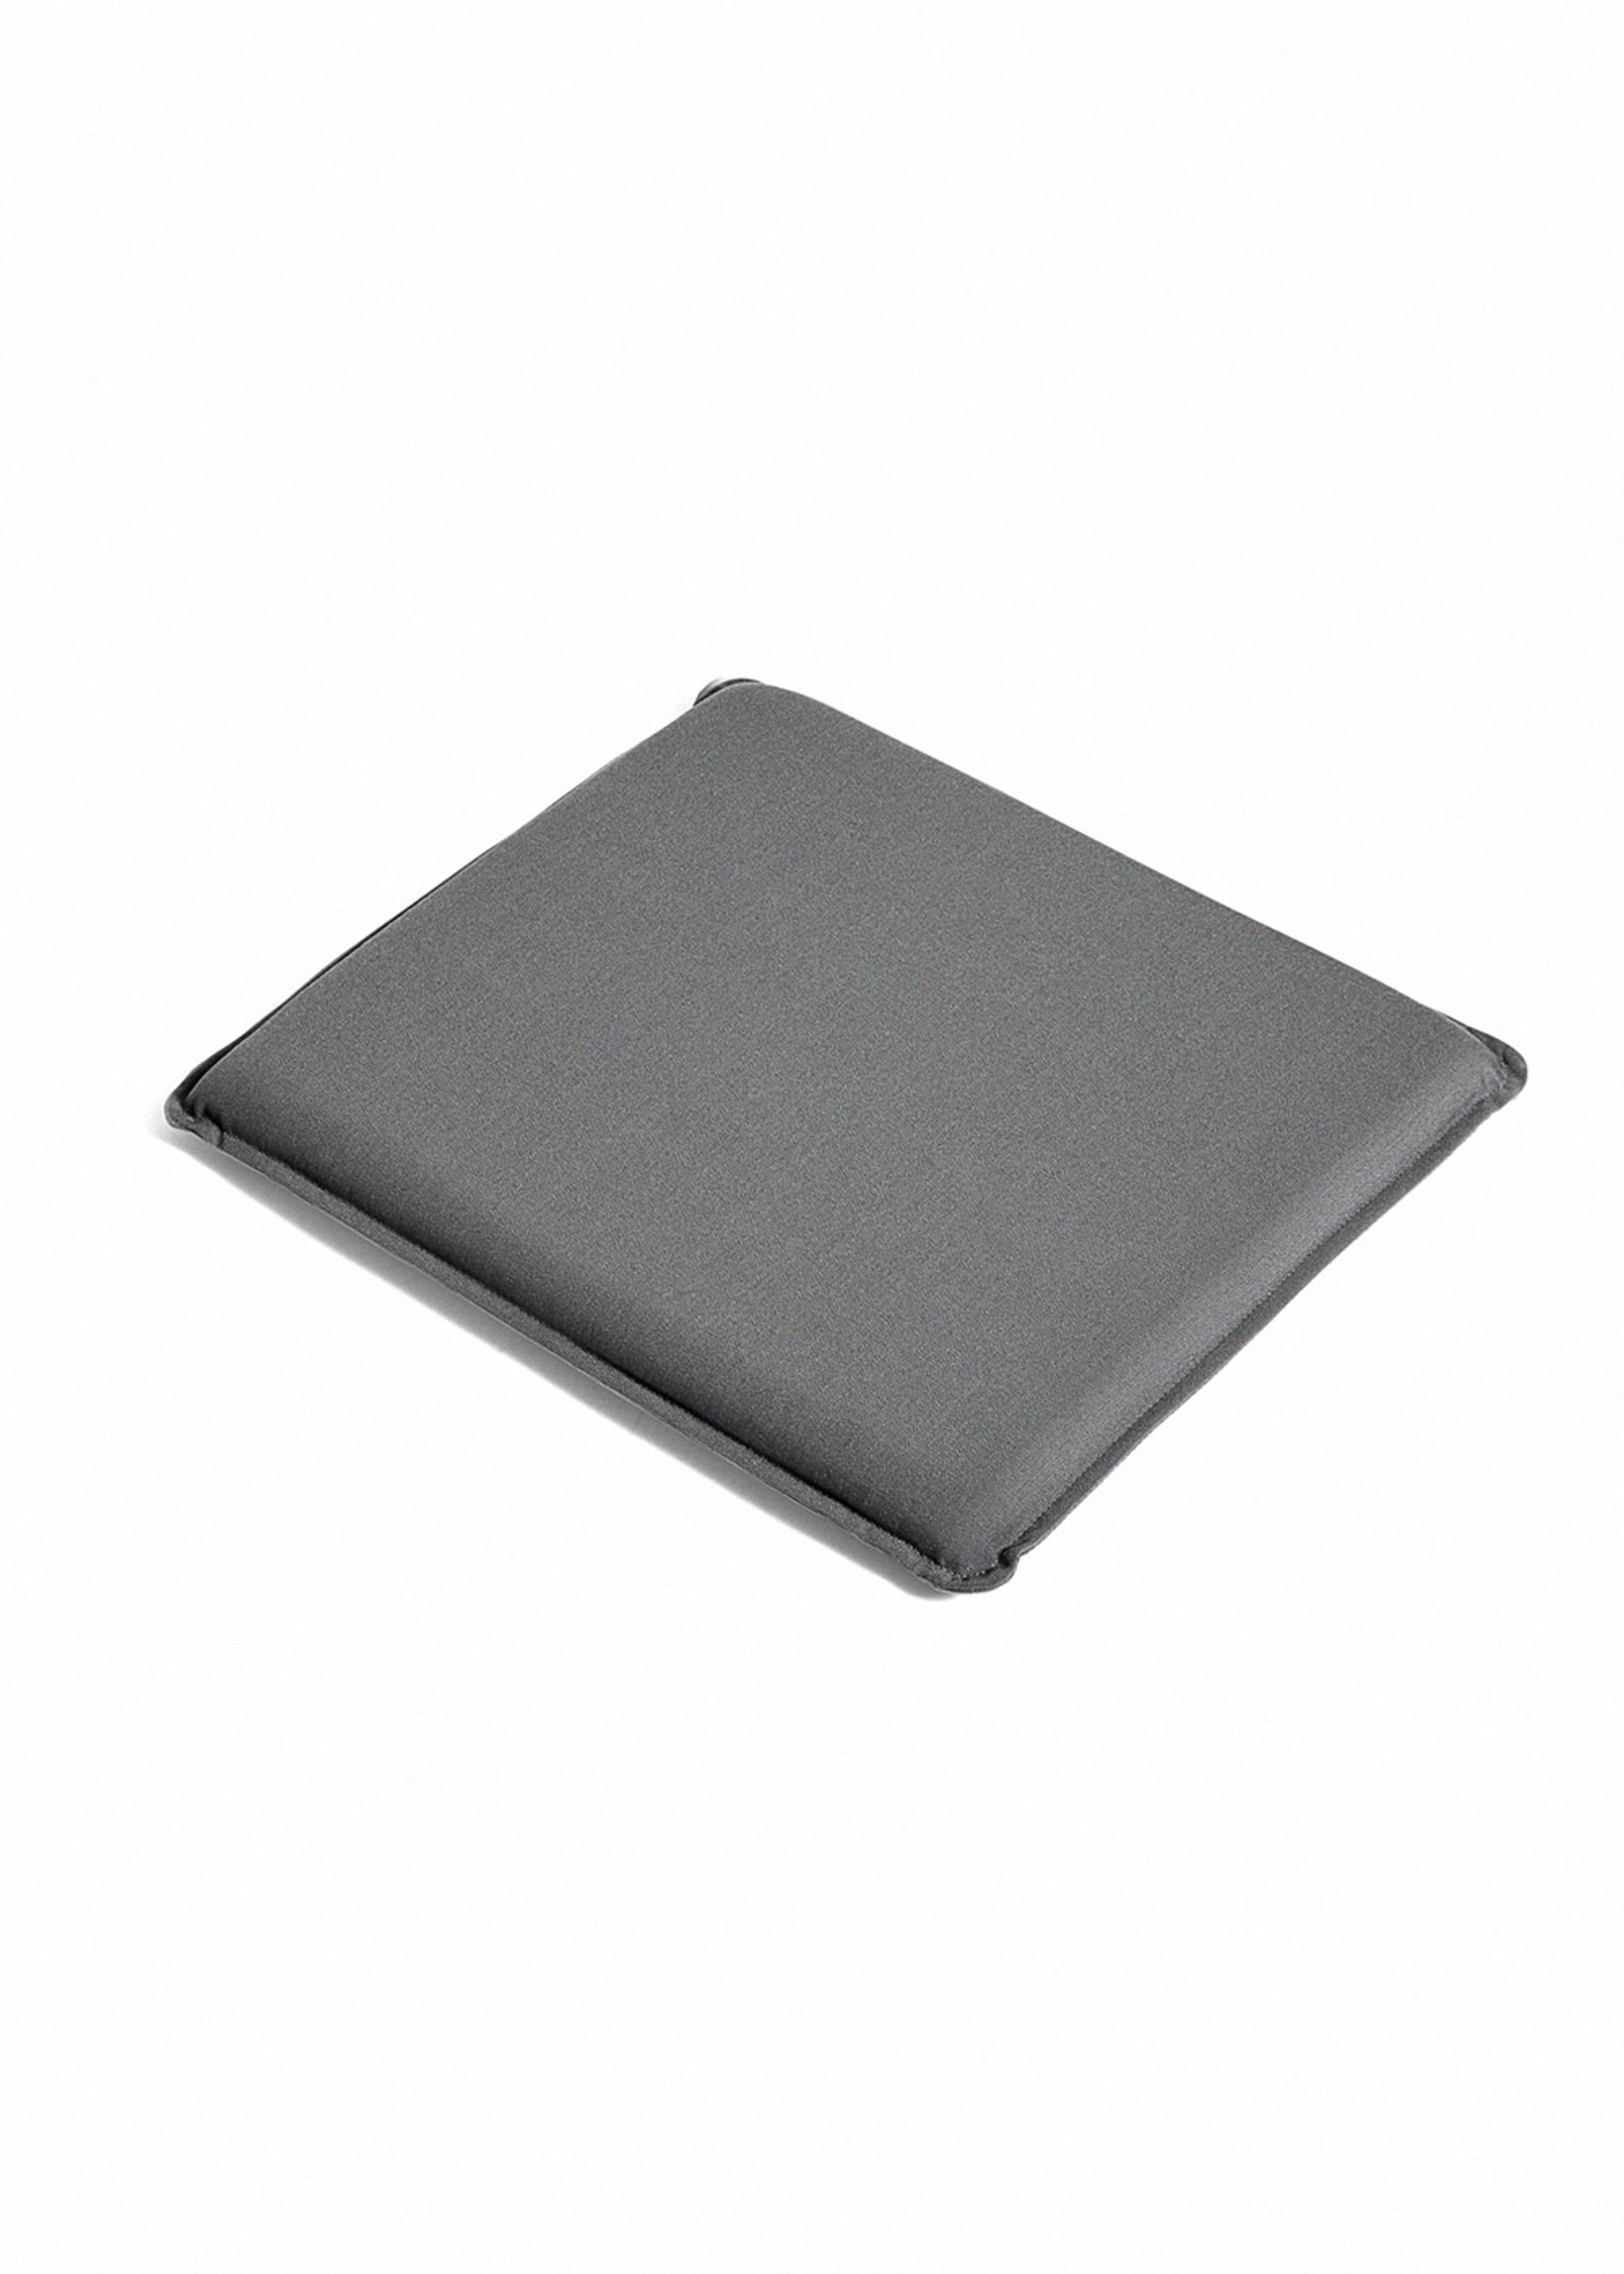 HAY - Almofada - PALISSADE / Seat Cushion for Chair & Armchair - Anthracite